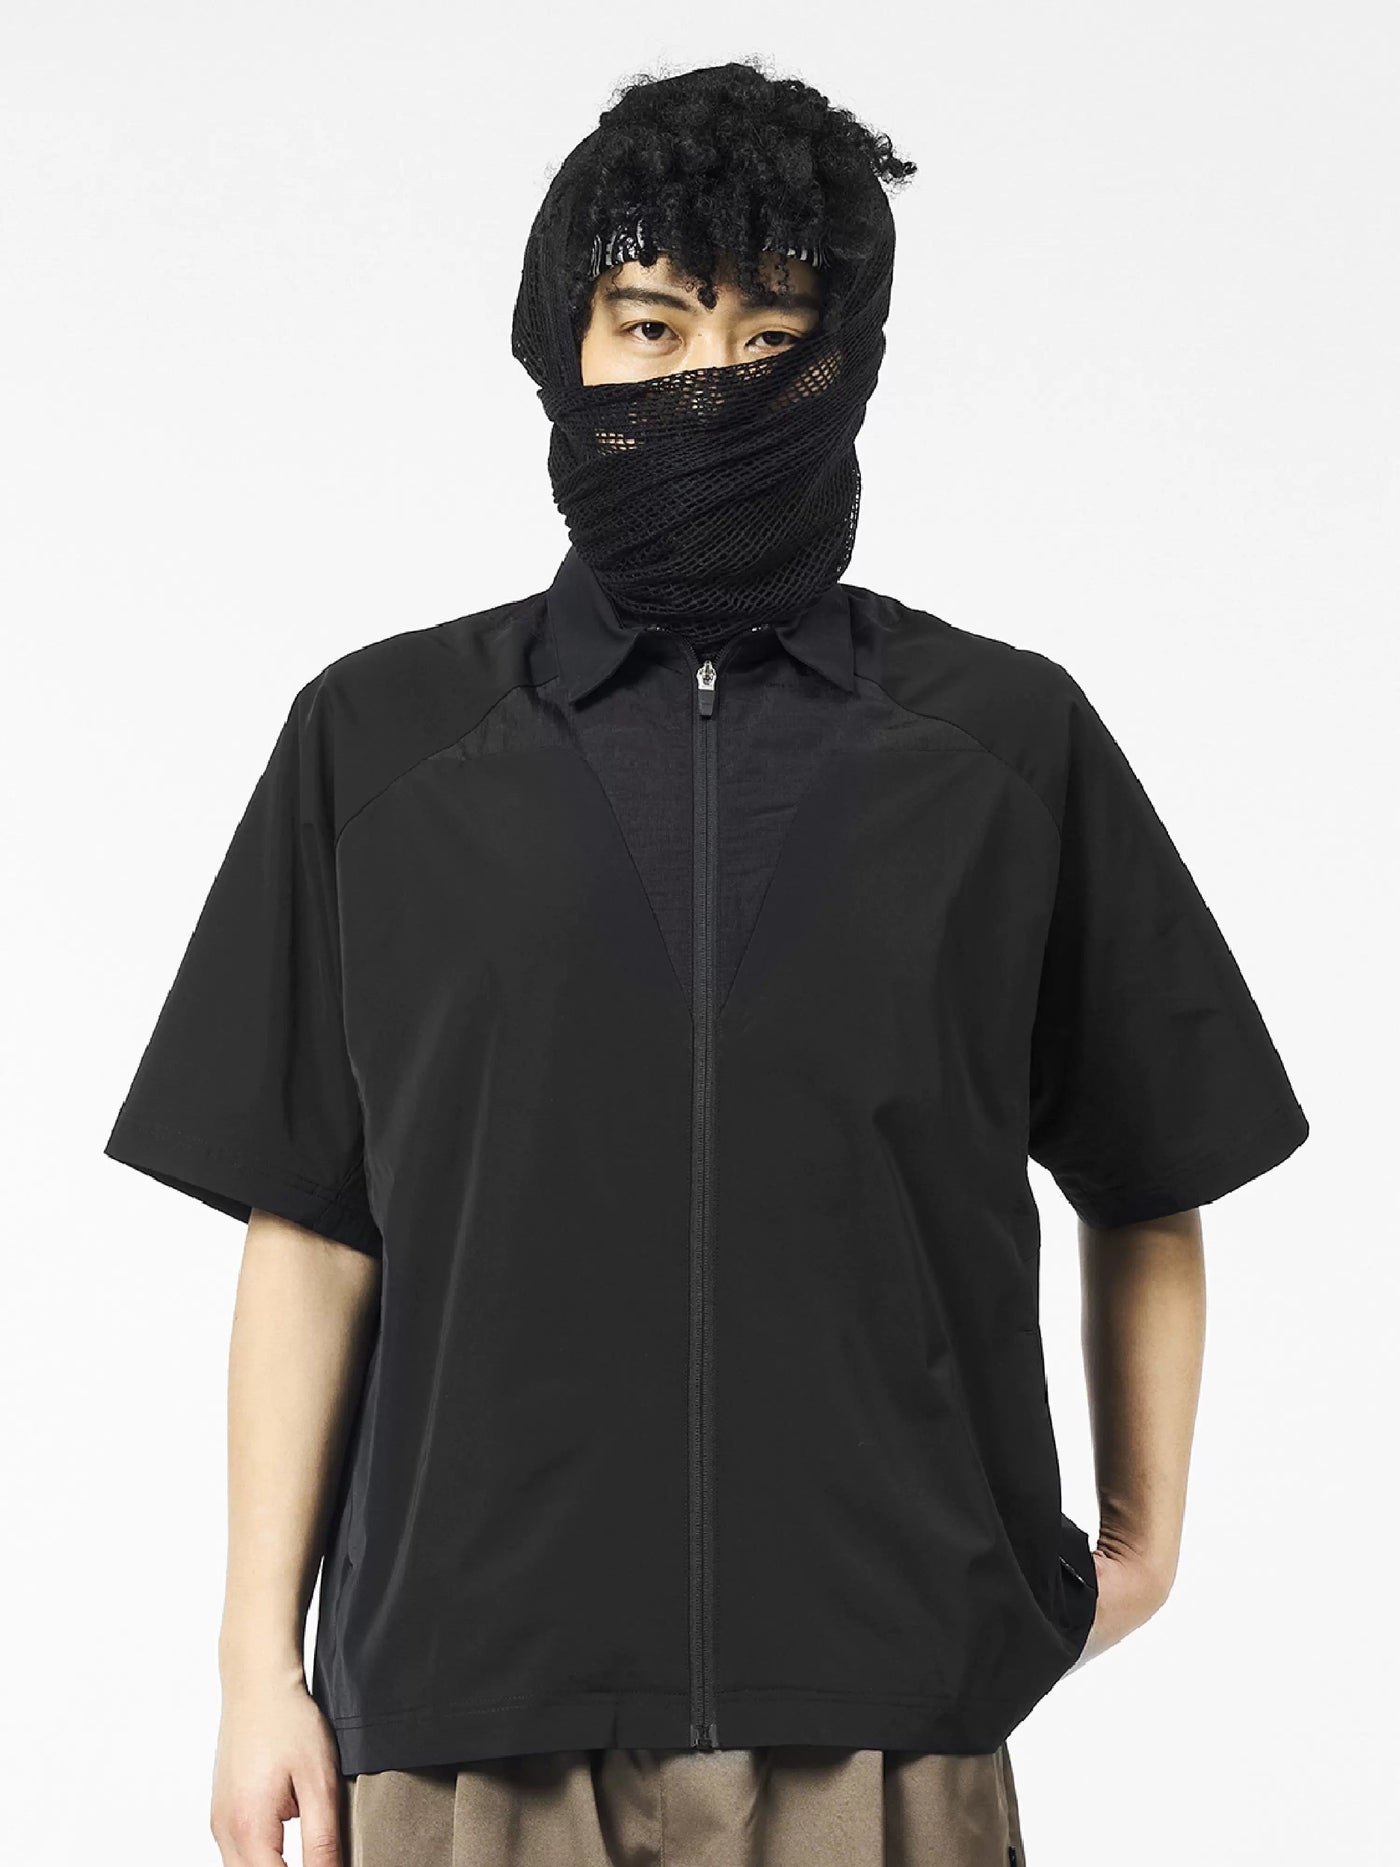 Two-Zip Boxy Collared Shirt Korean Street Fashion Shirt By Symbiotic Effect Shop Online at OH Vault